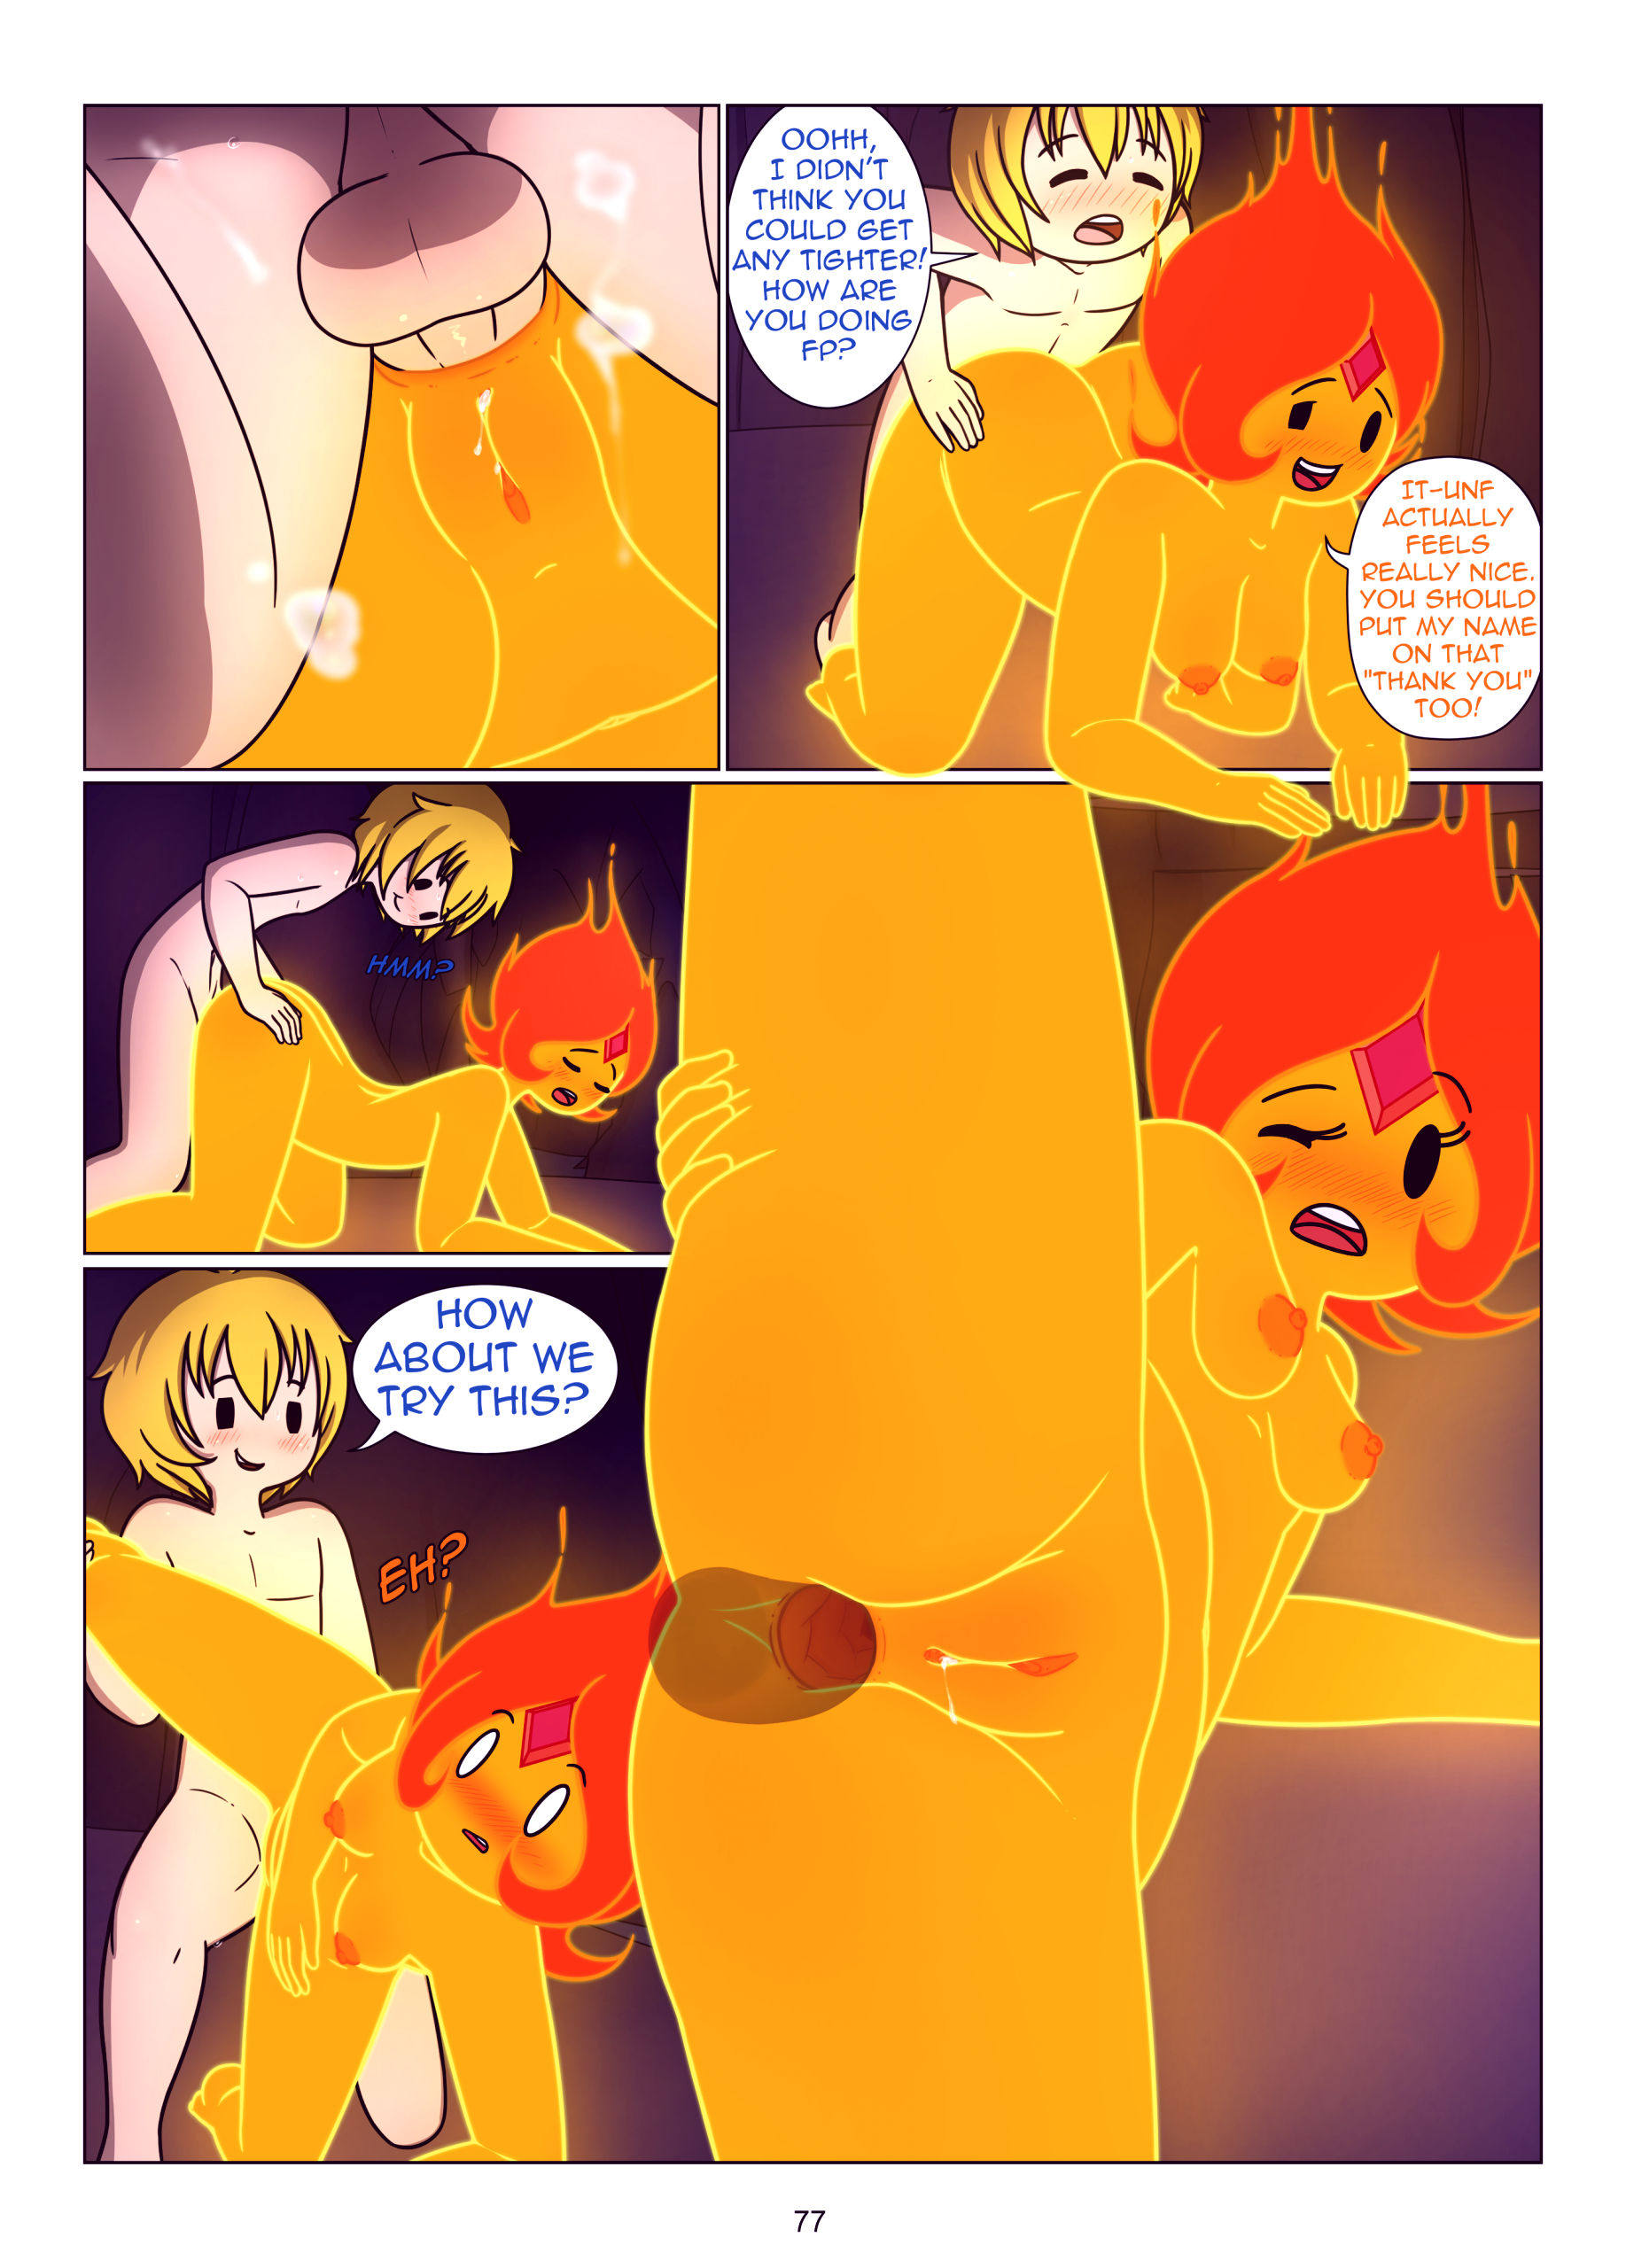 Misadventure time the collection porn comic picture 78